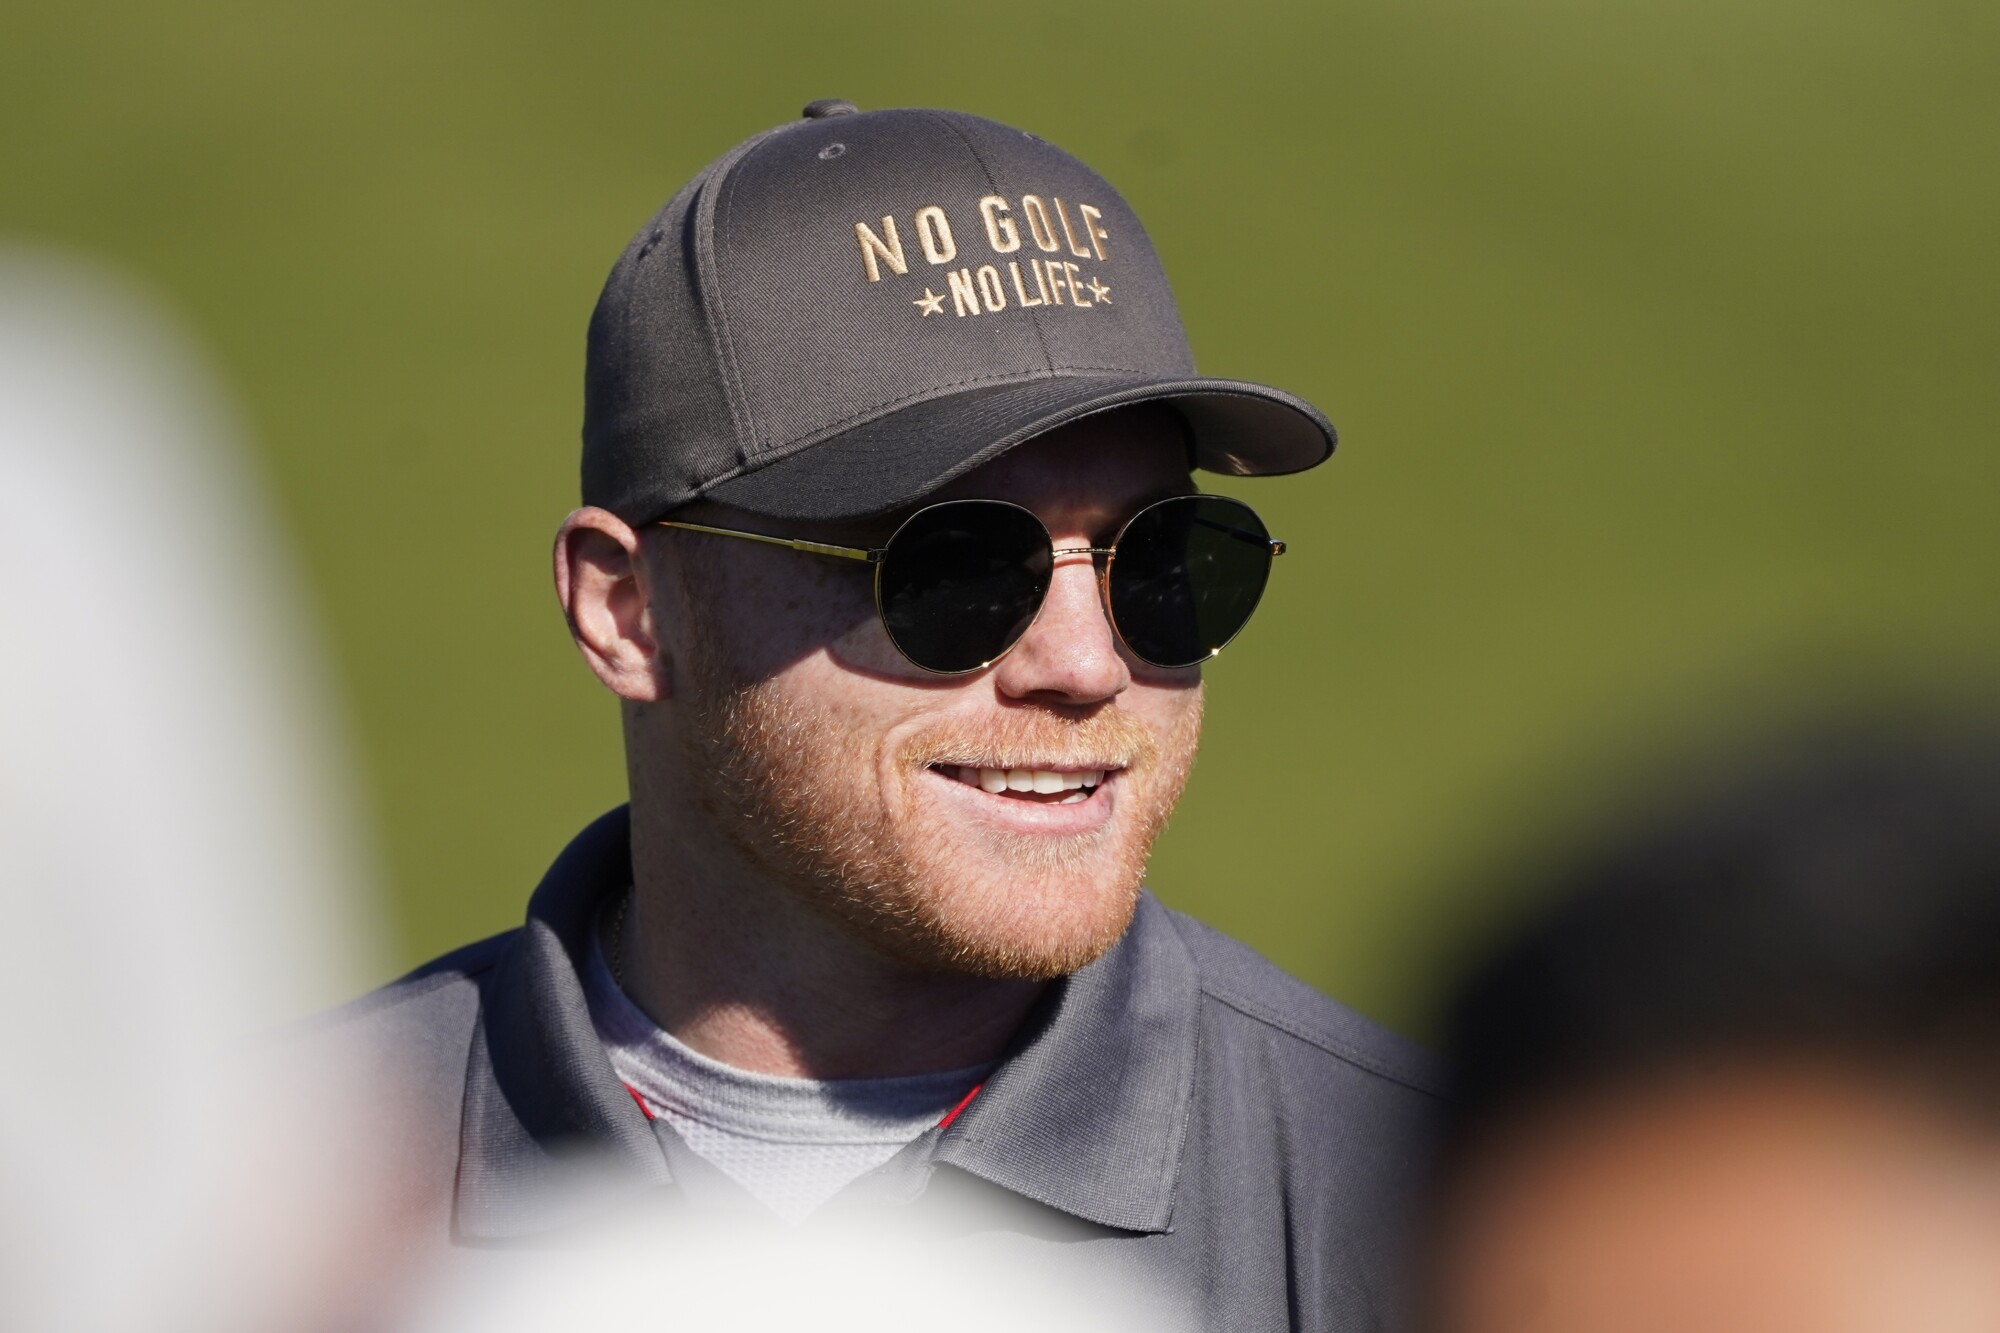 Canelo Alvarez smiles while competing in the AT&T Pebble Beach Pro-Am in February.